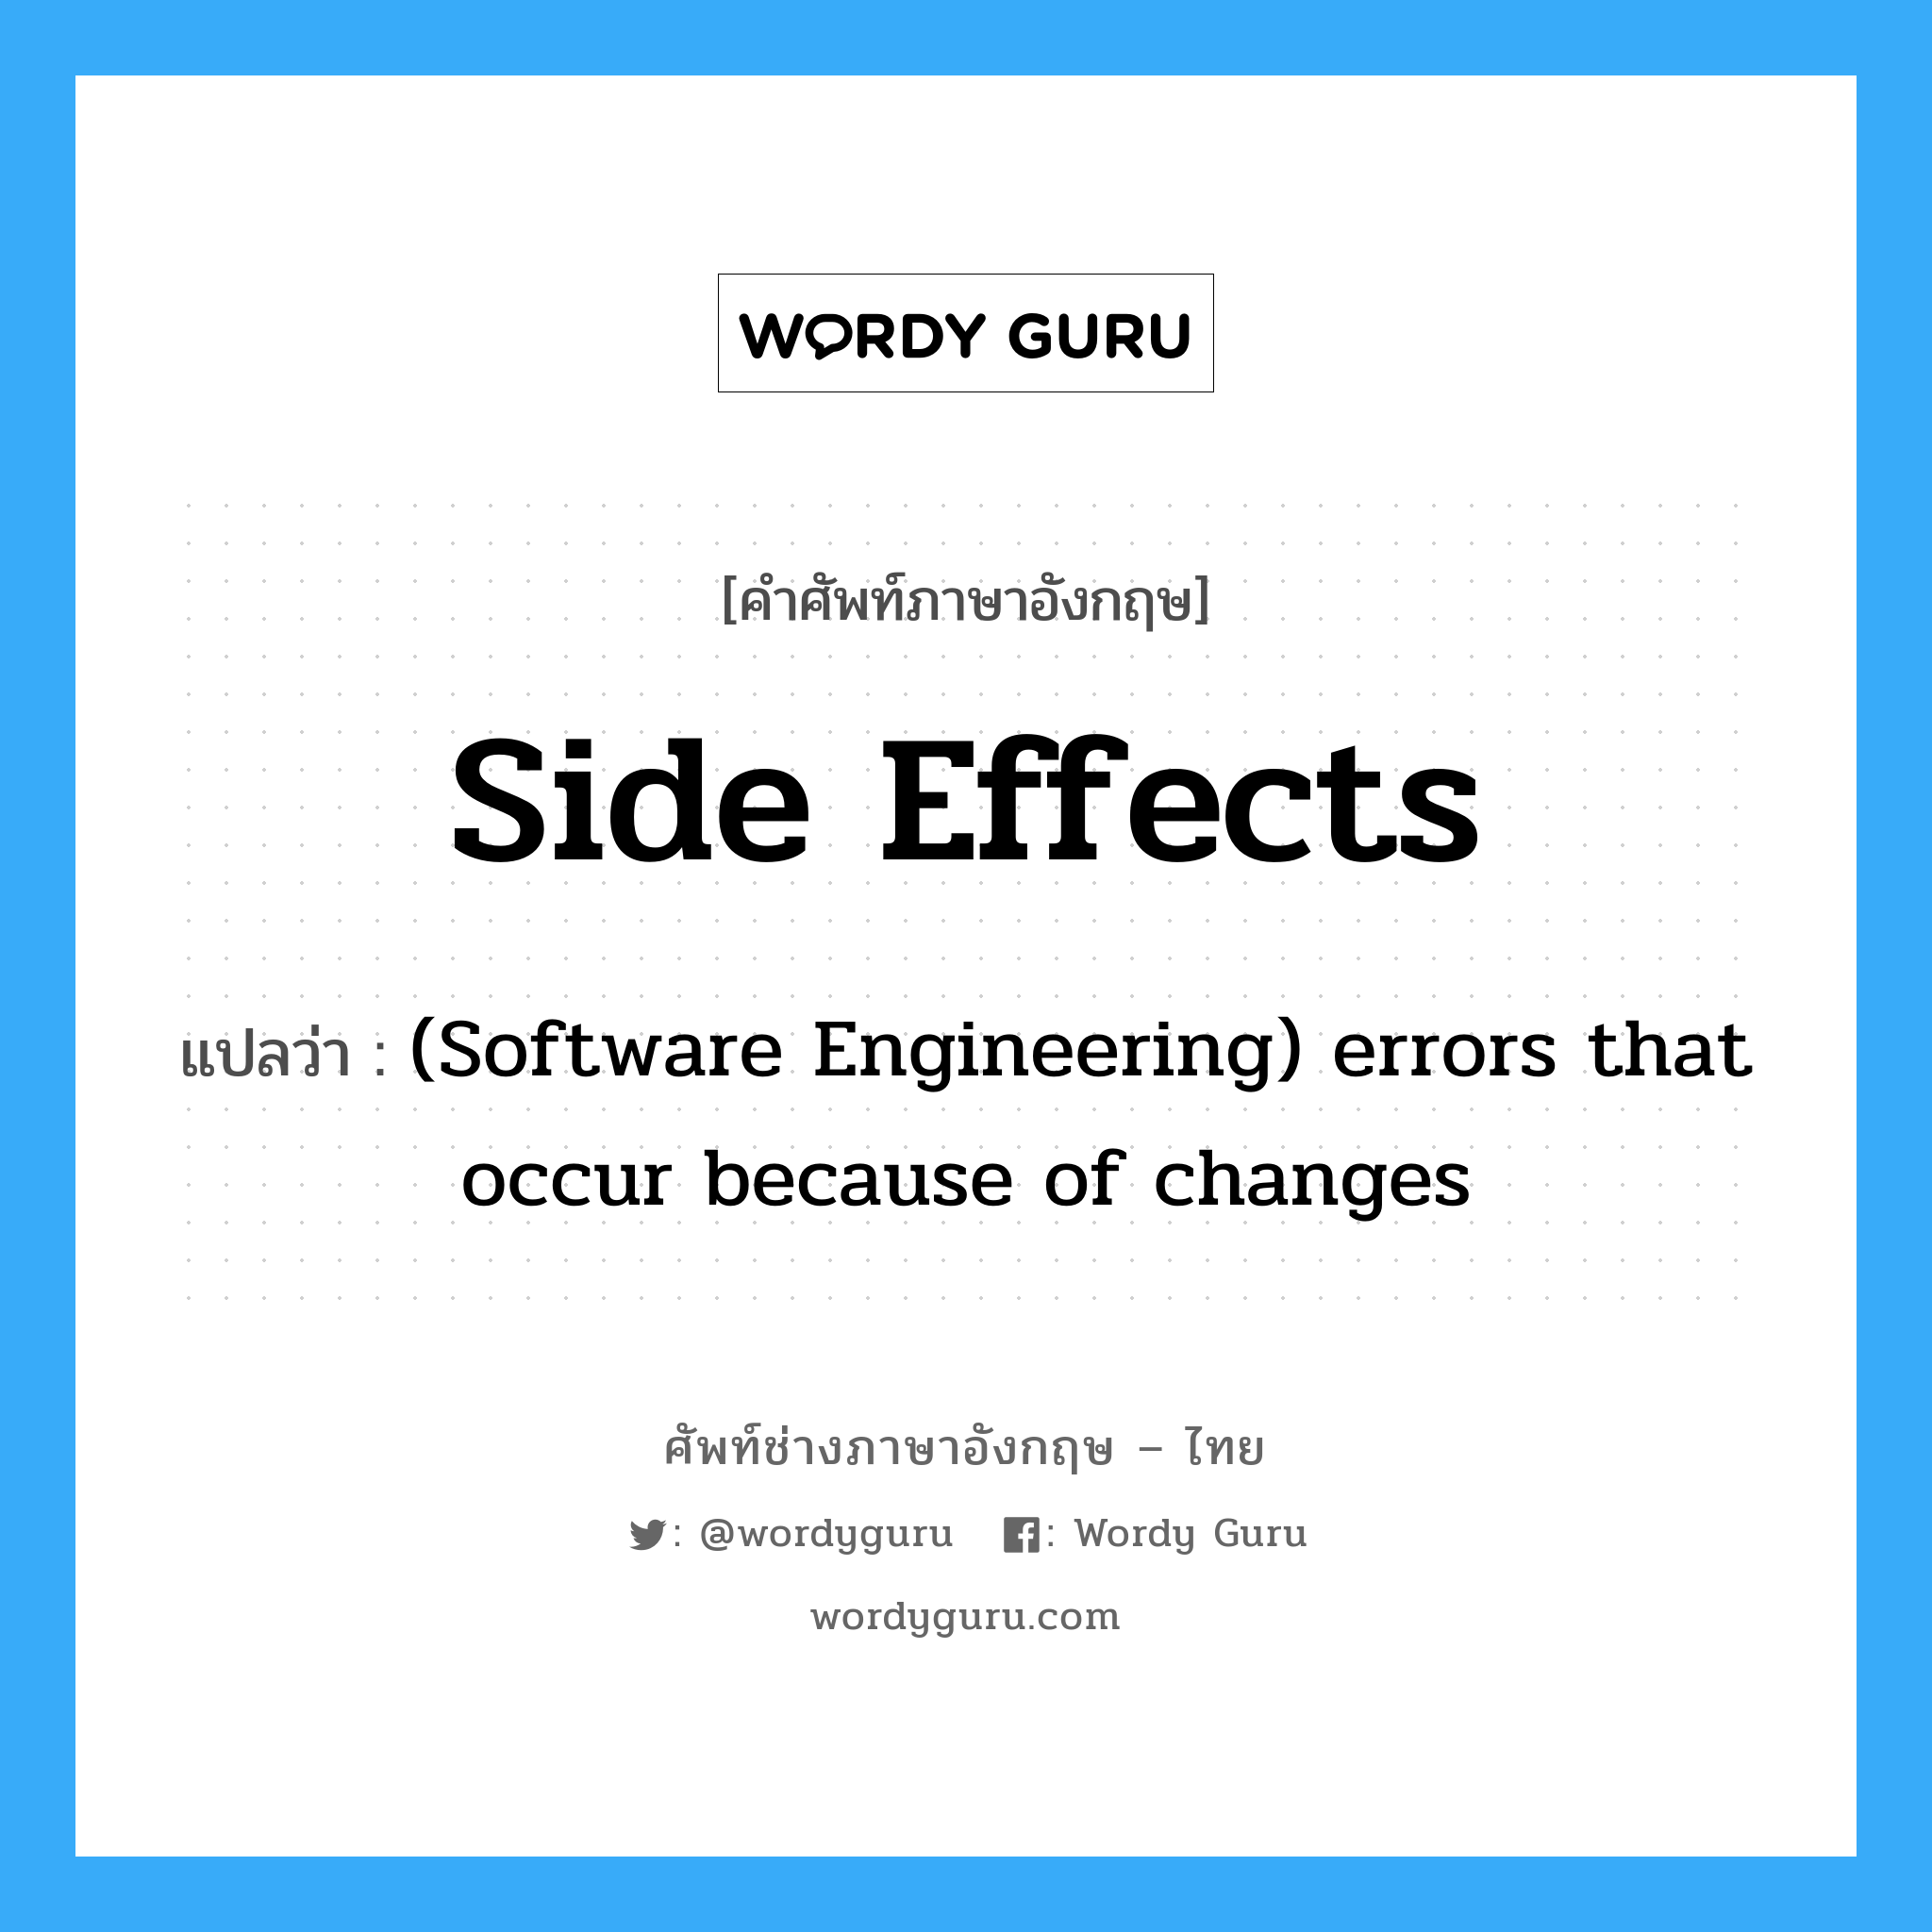 (Software Engineering) errors that occur because of changes ภาษาอังกฤษ?, คำศัพท์ช่างภาษาอังกฤษ - ไทย (Software Engineering) errors that occur because of changes คำศัพท์ภาษาอังกฤษ (Software Engineering) errors that occur because of changes แปลว่า Side effects